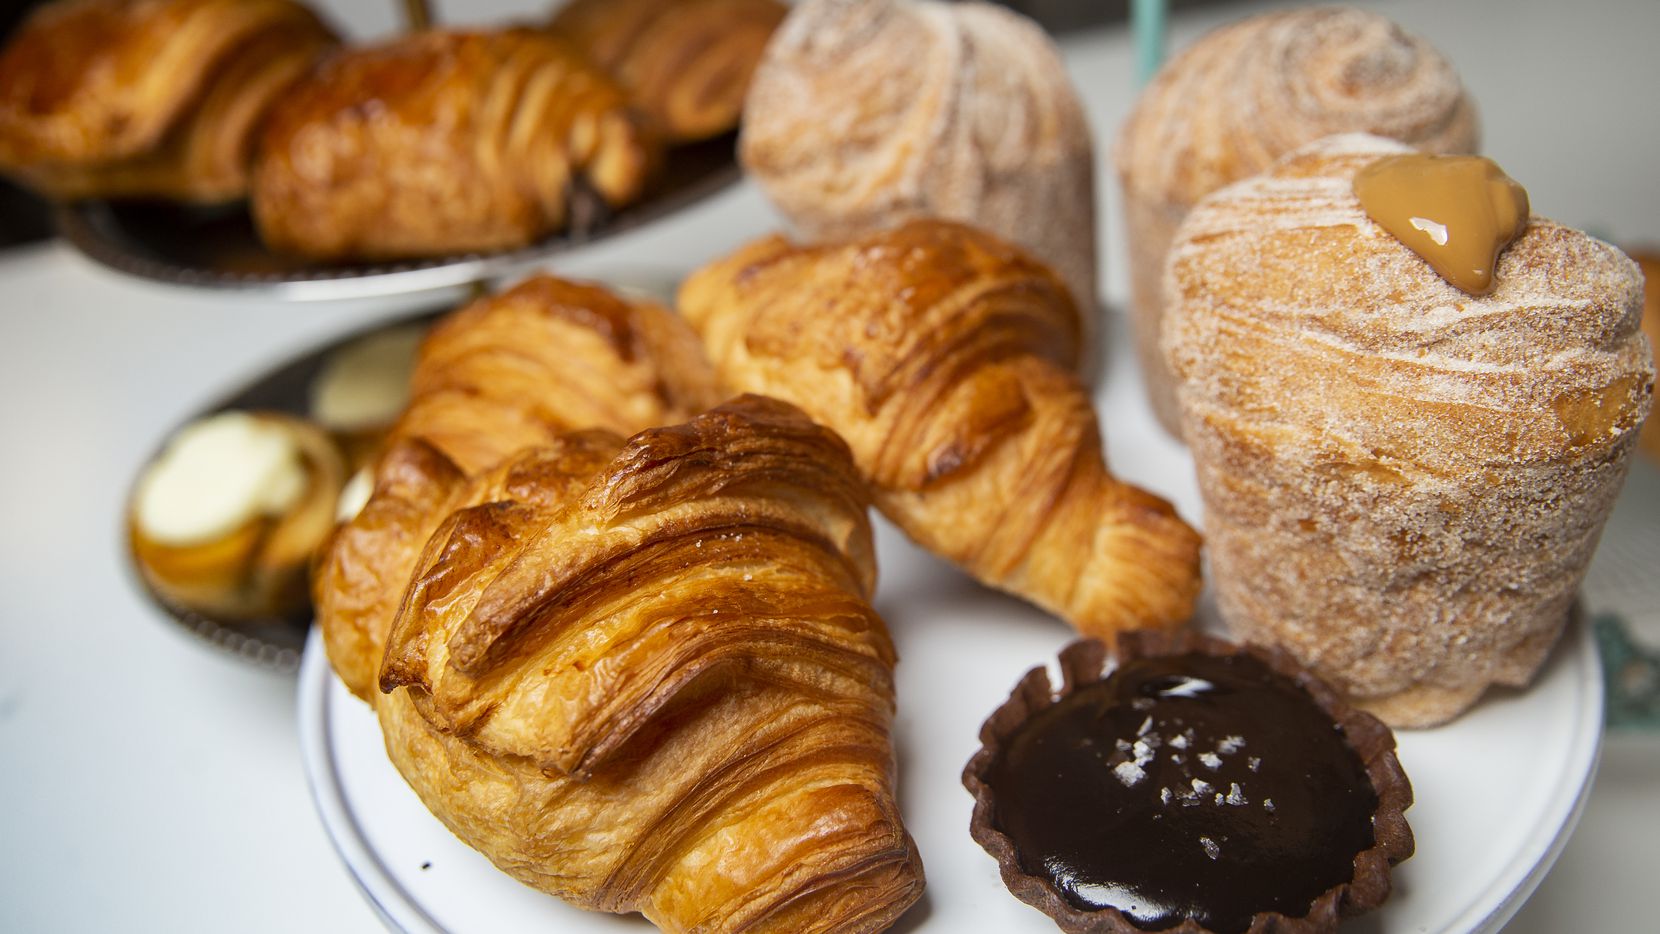 Pastries, including croissants, chocolate caramel tart and churro cruffins, are offered at...